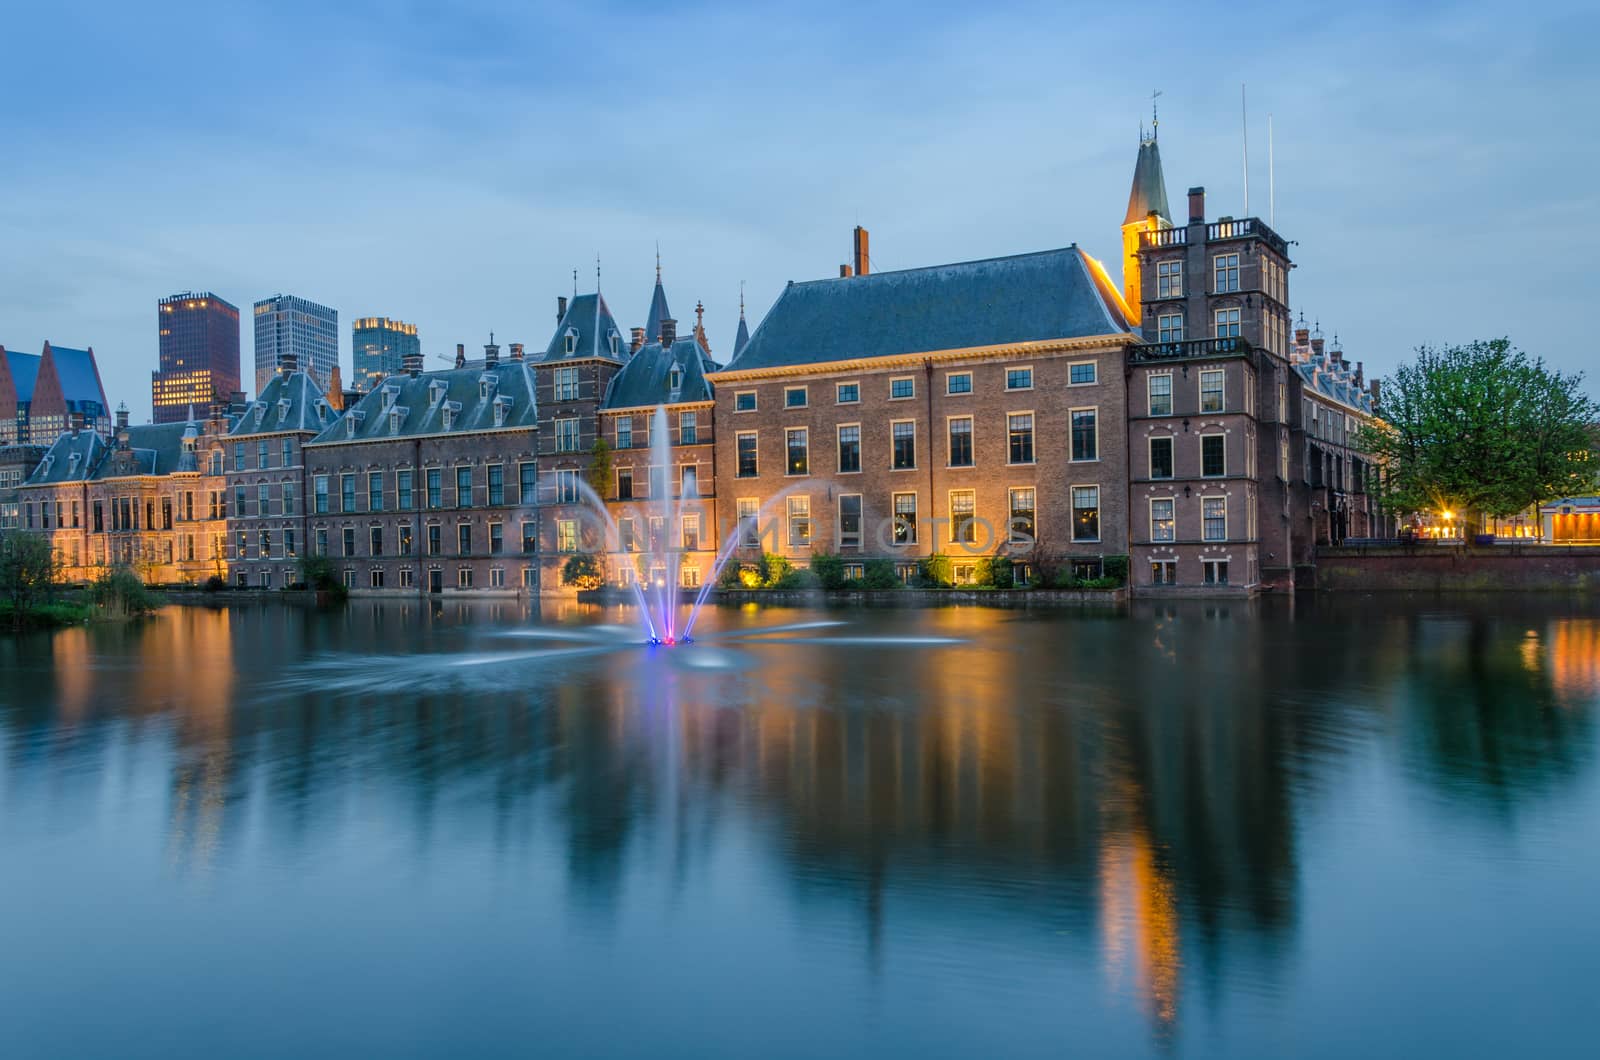 Binnenhof palace, place of Parliament at Dusk in The Hague, Netherlands